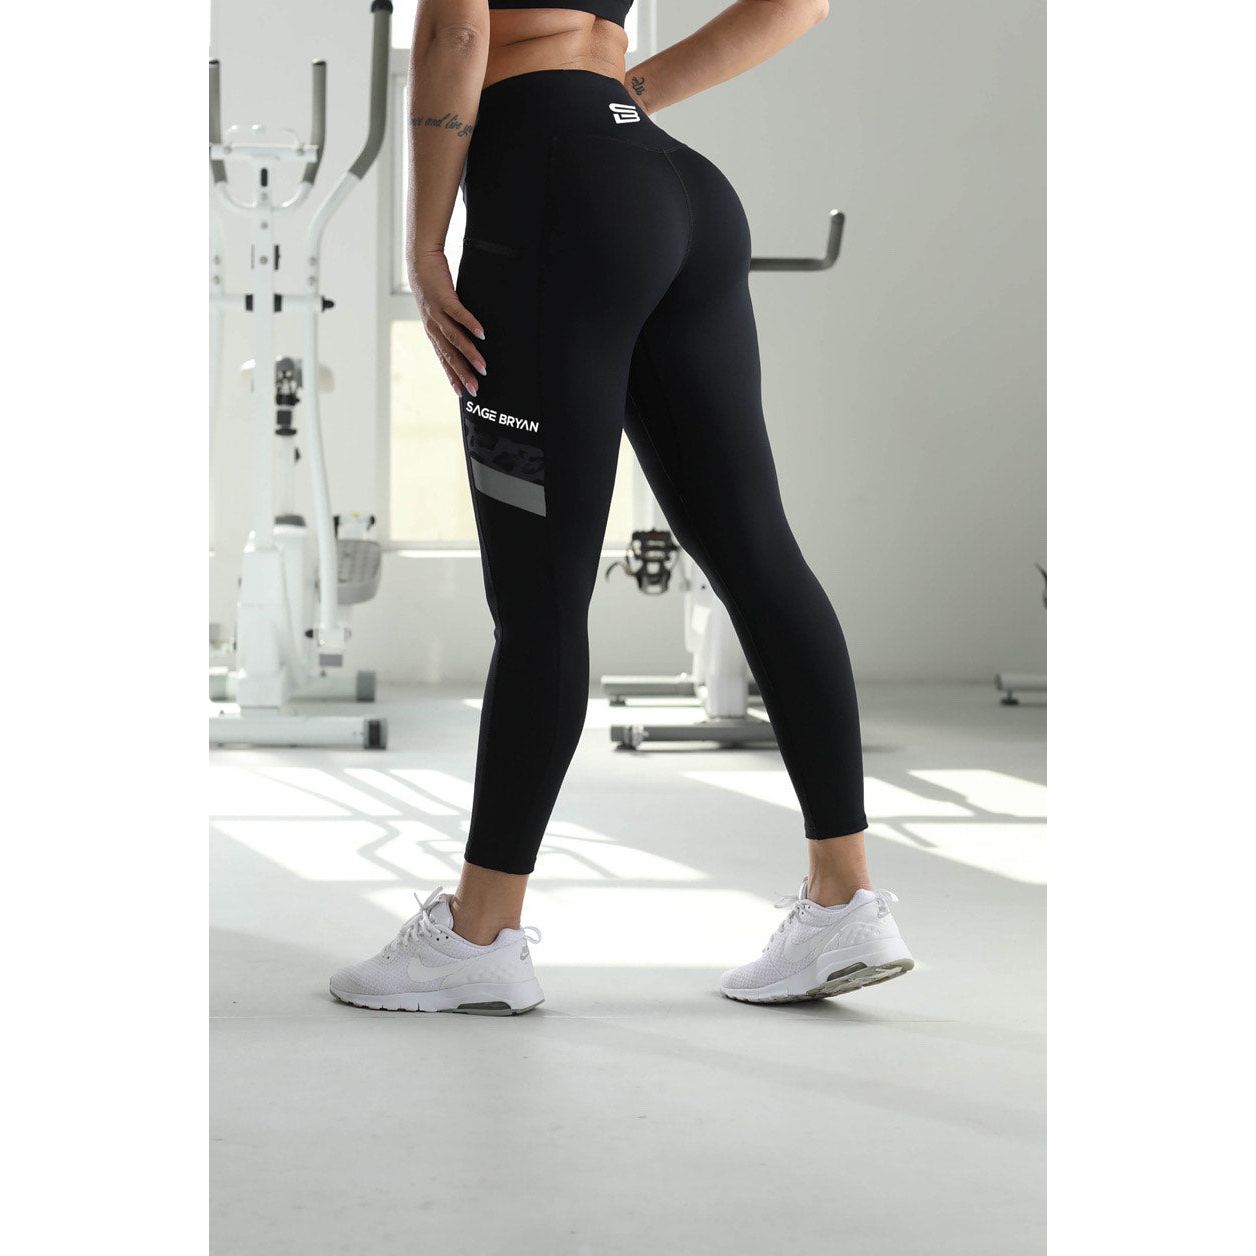 High Quality Sports Pants Spandex Yoga Leggings With Pocket Push Up Fitness  Sports Leggins Workout Gym Tights Yoga Clothes - Yoga Pants - AliExpress